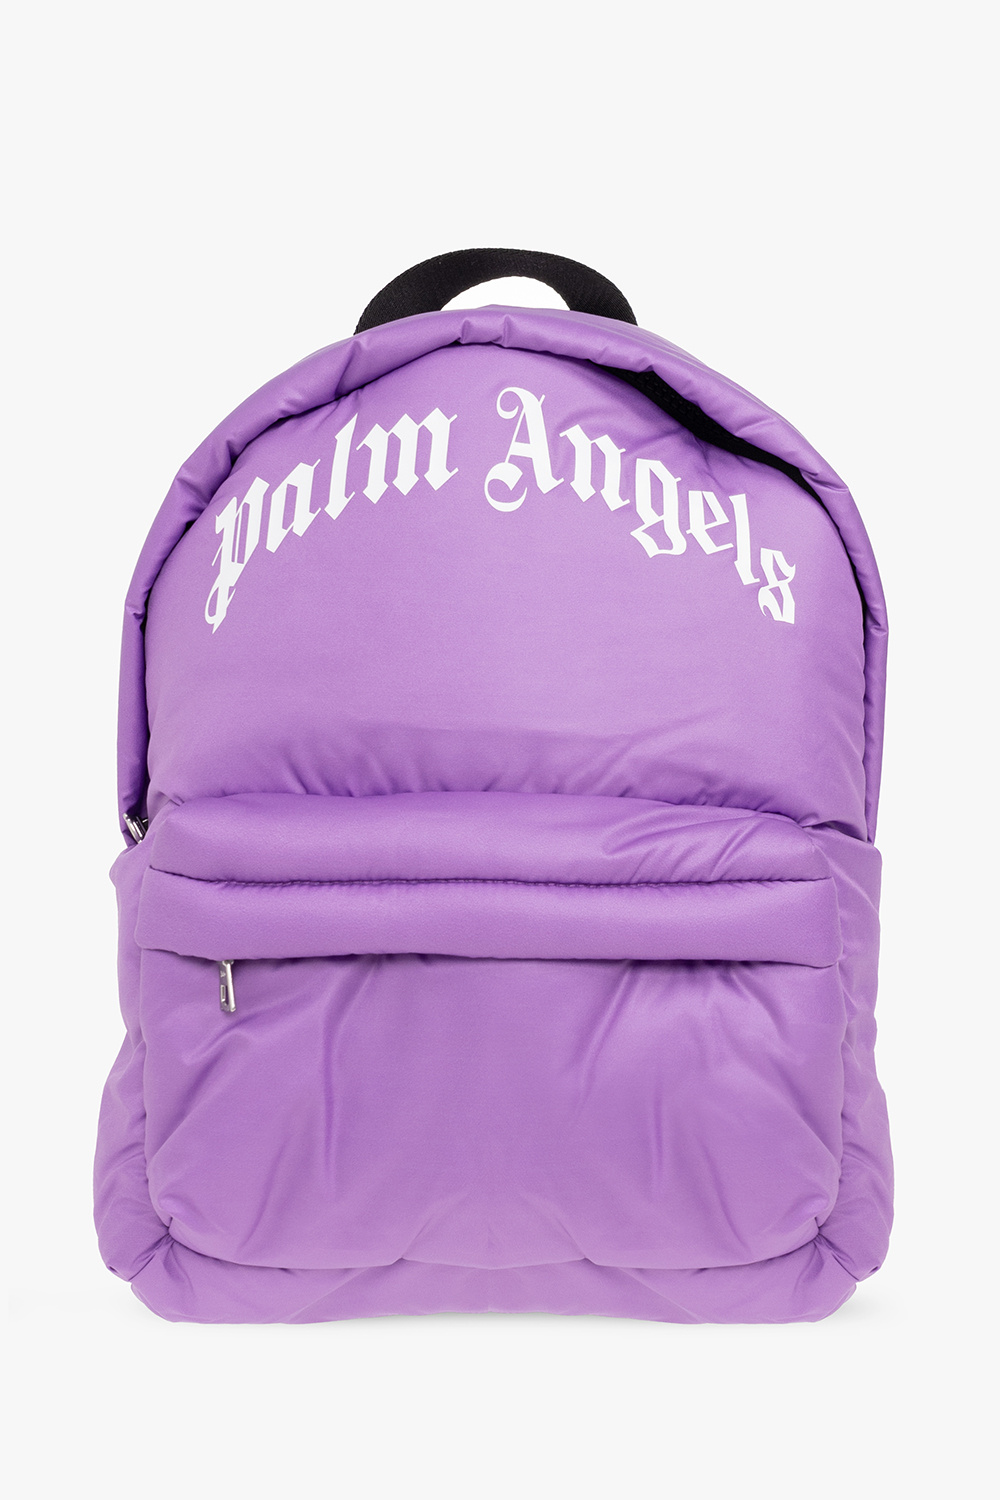 Palm Angels Kids There backpack with logo